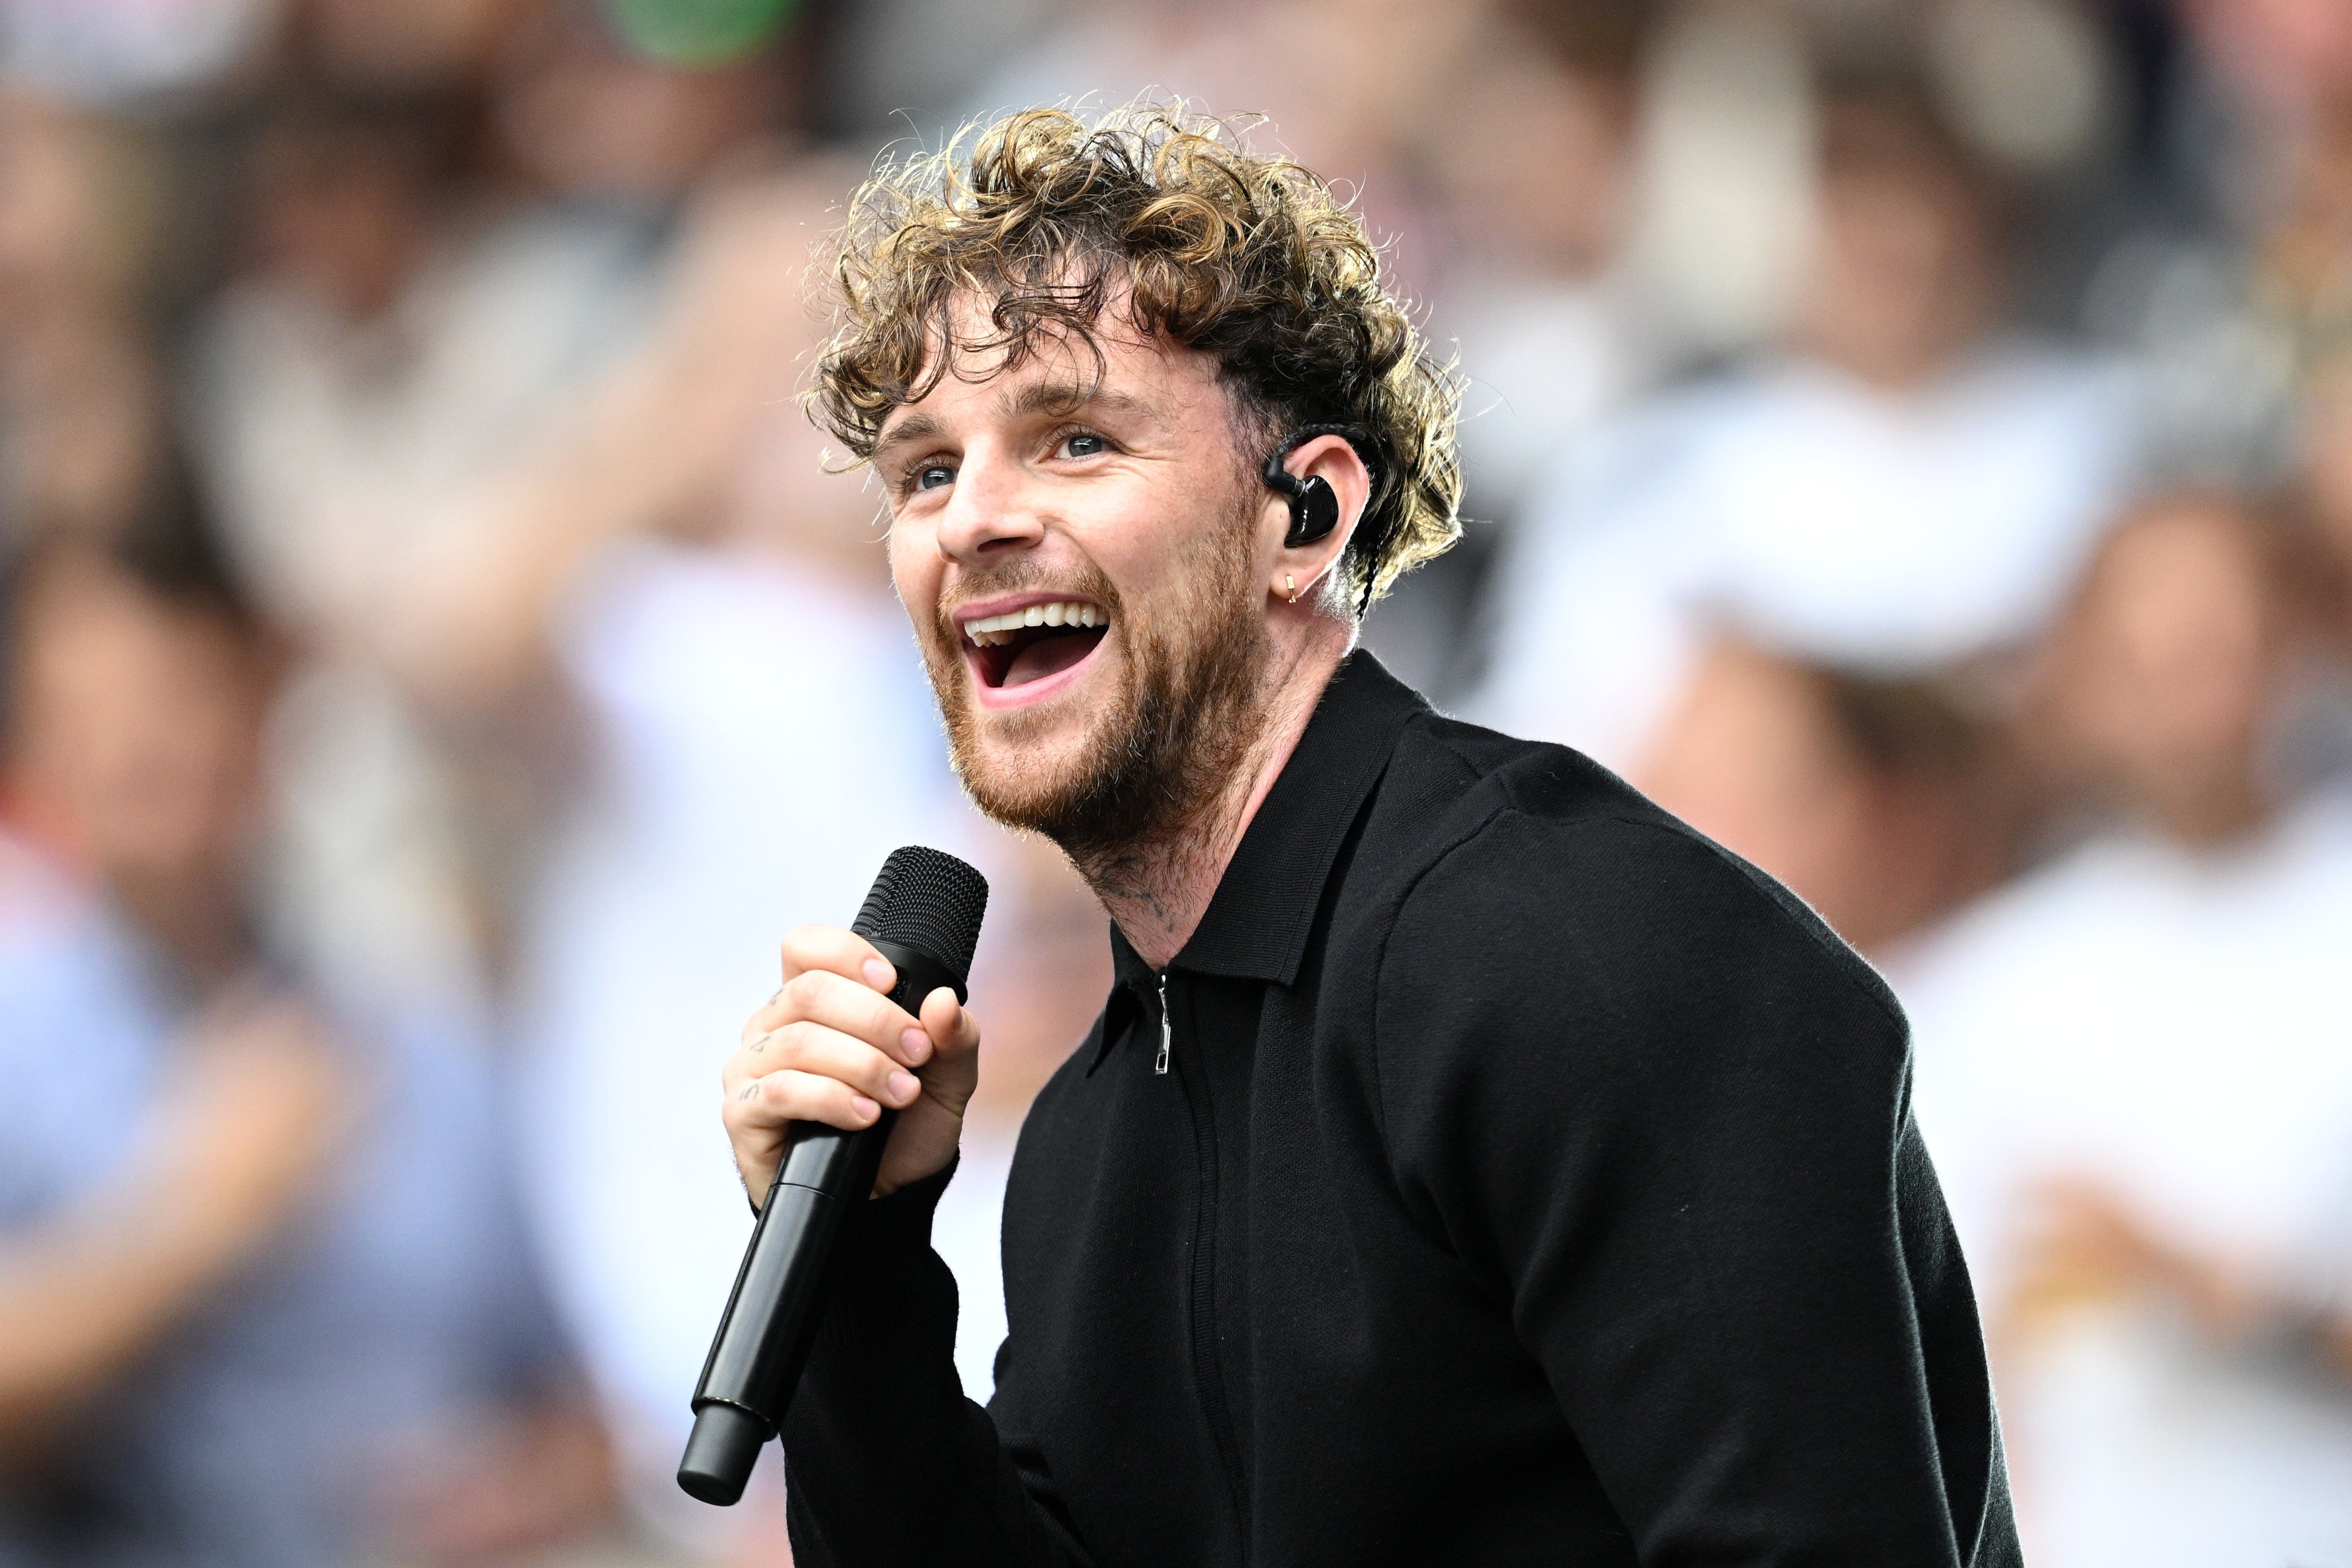 British singer-songwriter Tom Grennan, who will perform at the Clockenflap festival in Hong Kong in December 2023. Photo: Getty Images